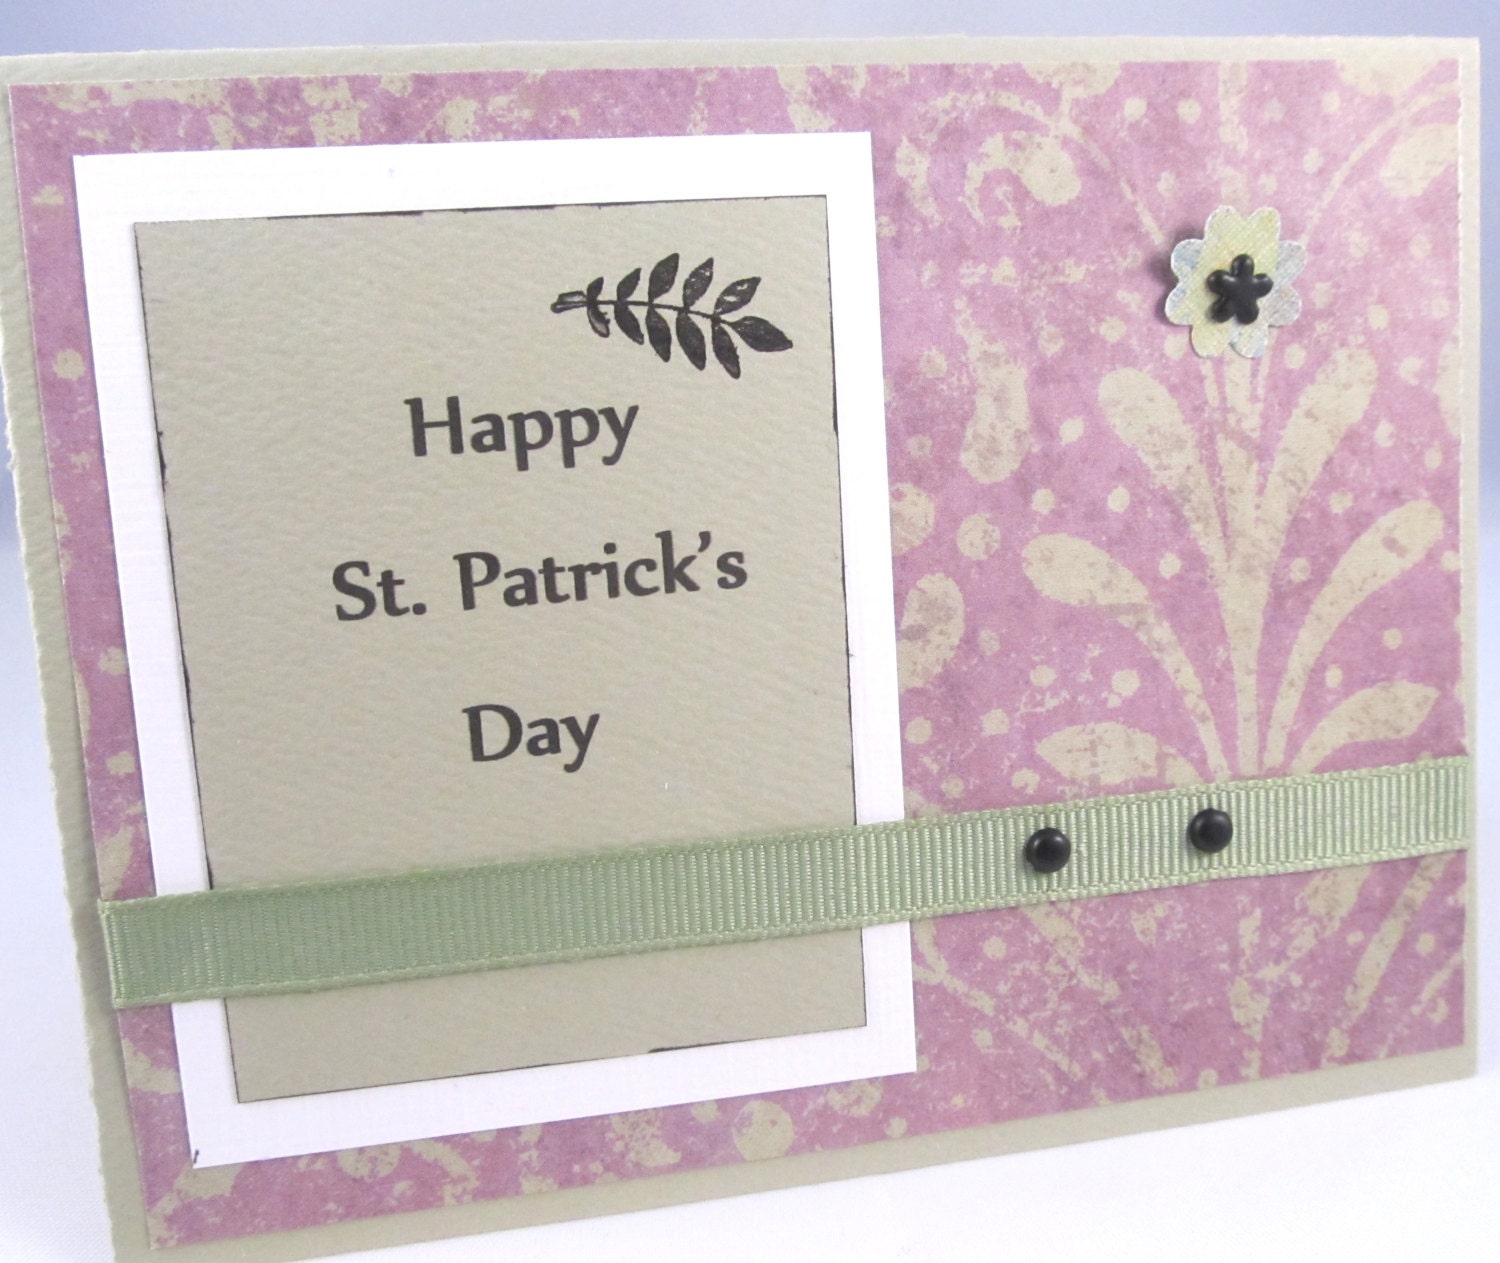 St. Patrick's Day Card - Handmade Card - Happy St. Patrick's Day - Pretty Card - Blank Card - Black Accents - Green Card - Hand Stamped - PrettyByrdDesigns